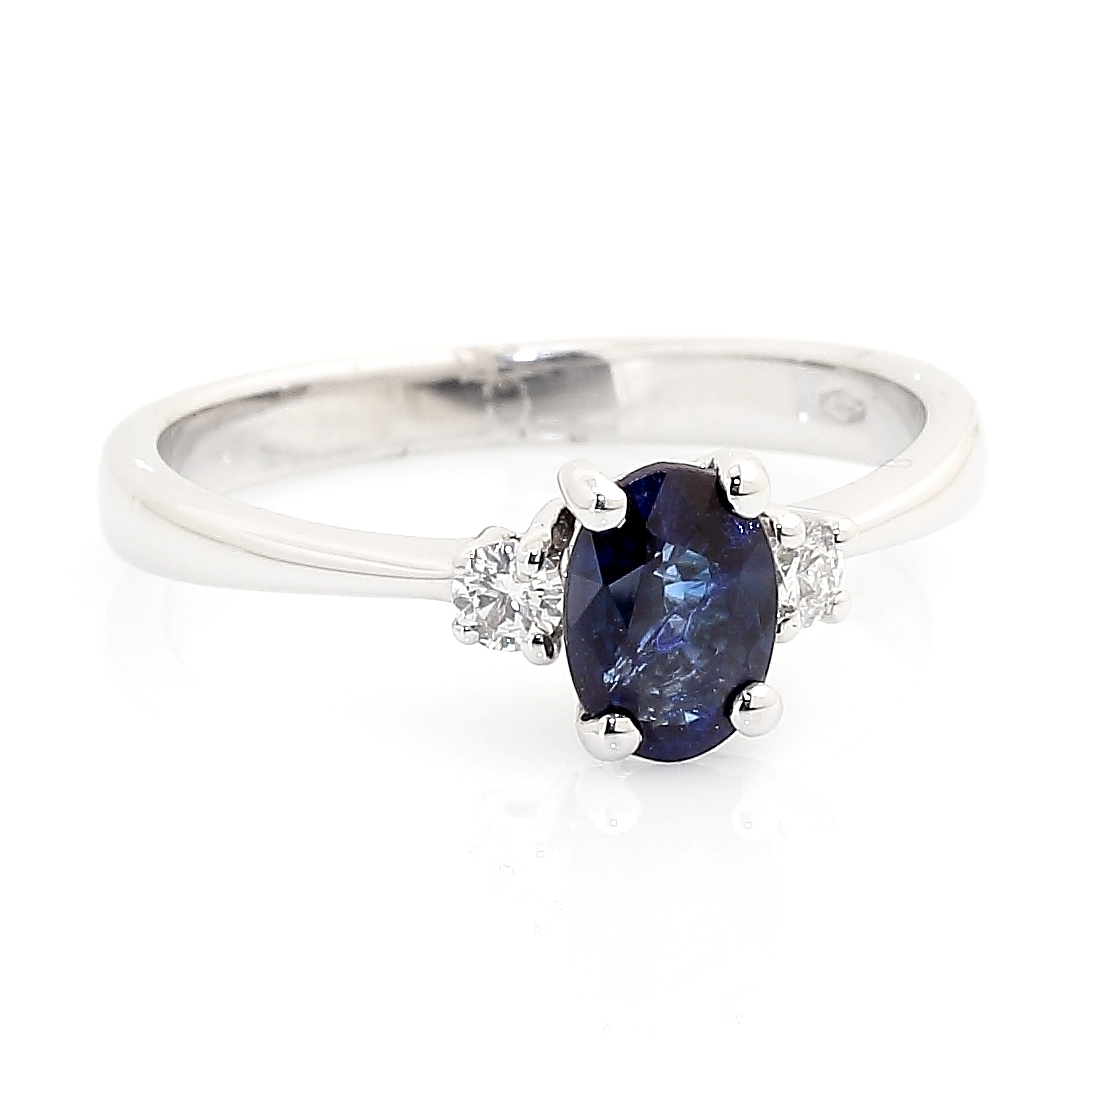 750 Mill. White Gold Ring with 0,12 Ct. Diamonds and 0,75 Ct. Sapphire